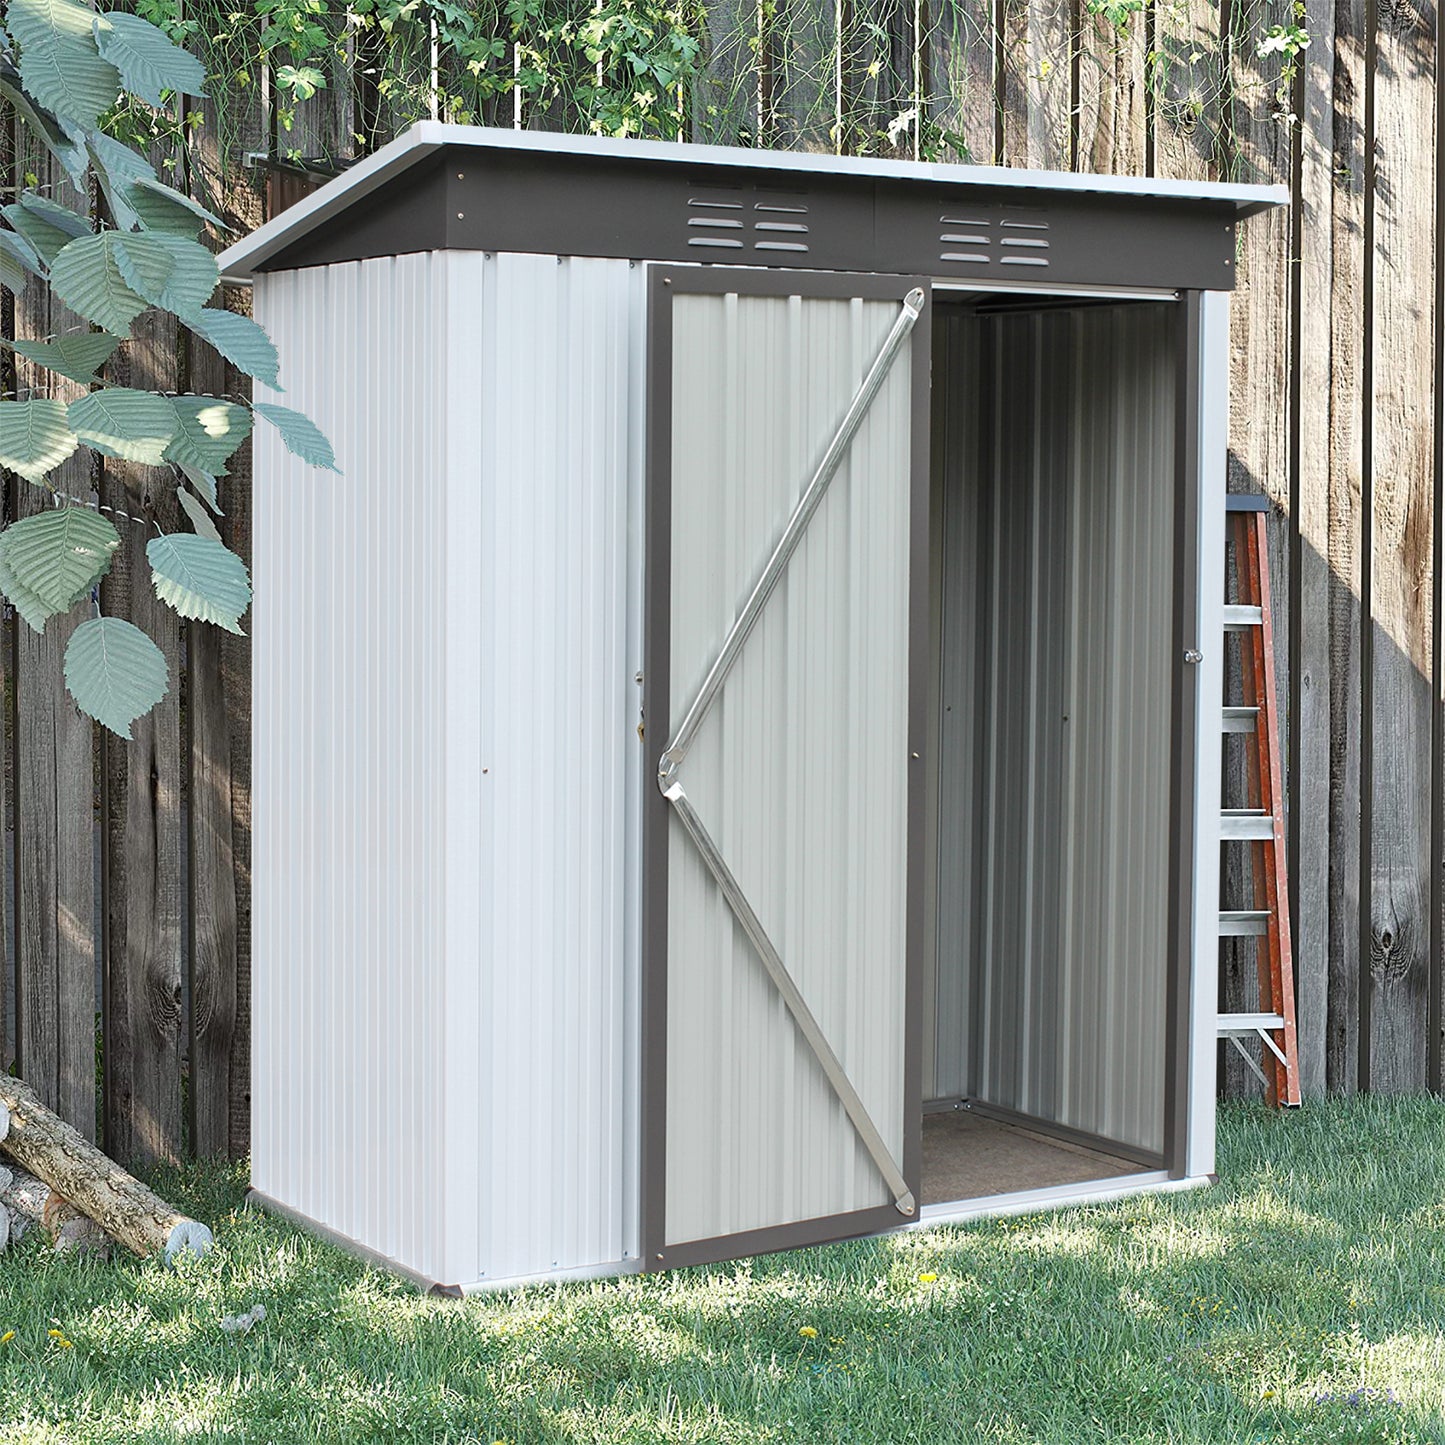 Outdoor Shed Storage Cabinet, 5FT X 3FT Garden Storage Shed Metal with Lockable Doors, Outside Vertical Shed for Patio Lawn Backyard Trash Cans Pet, LJ3915